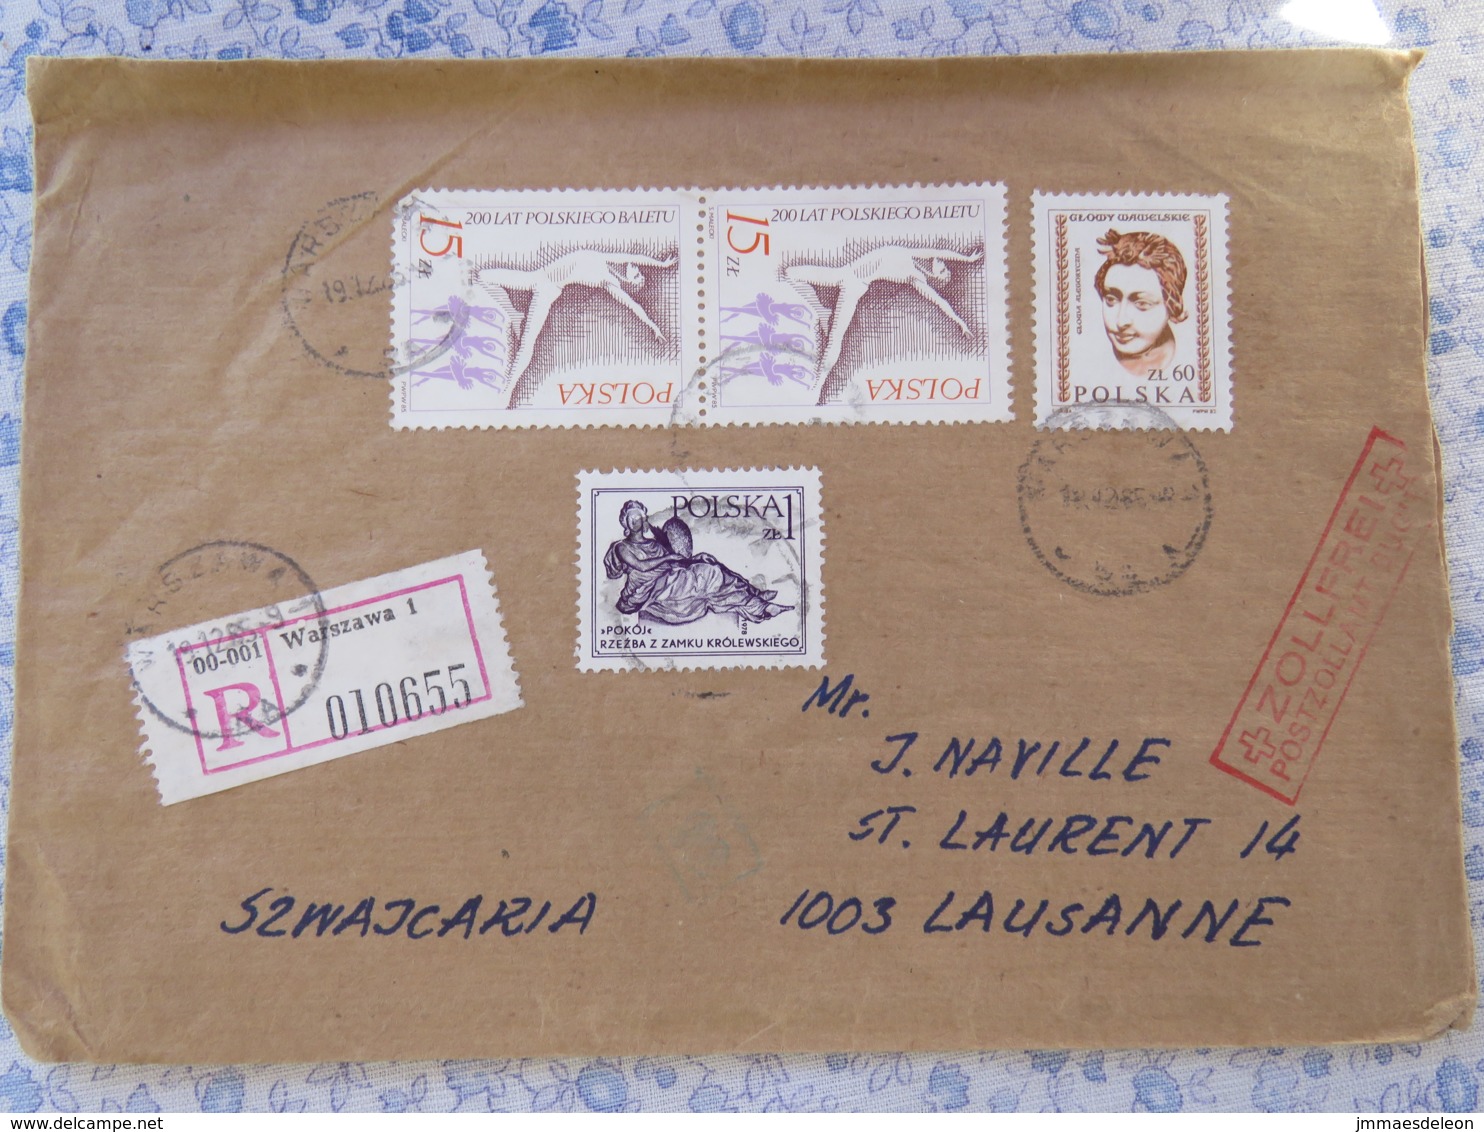 Poland 1989 Registered Cover To Switzerland - Archaeology Woman Head - Dance Ballet - Peace Statue - Covers & Documents